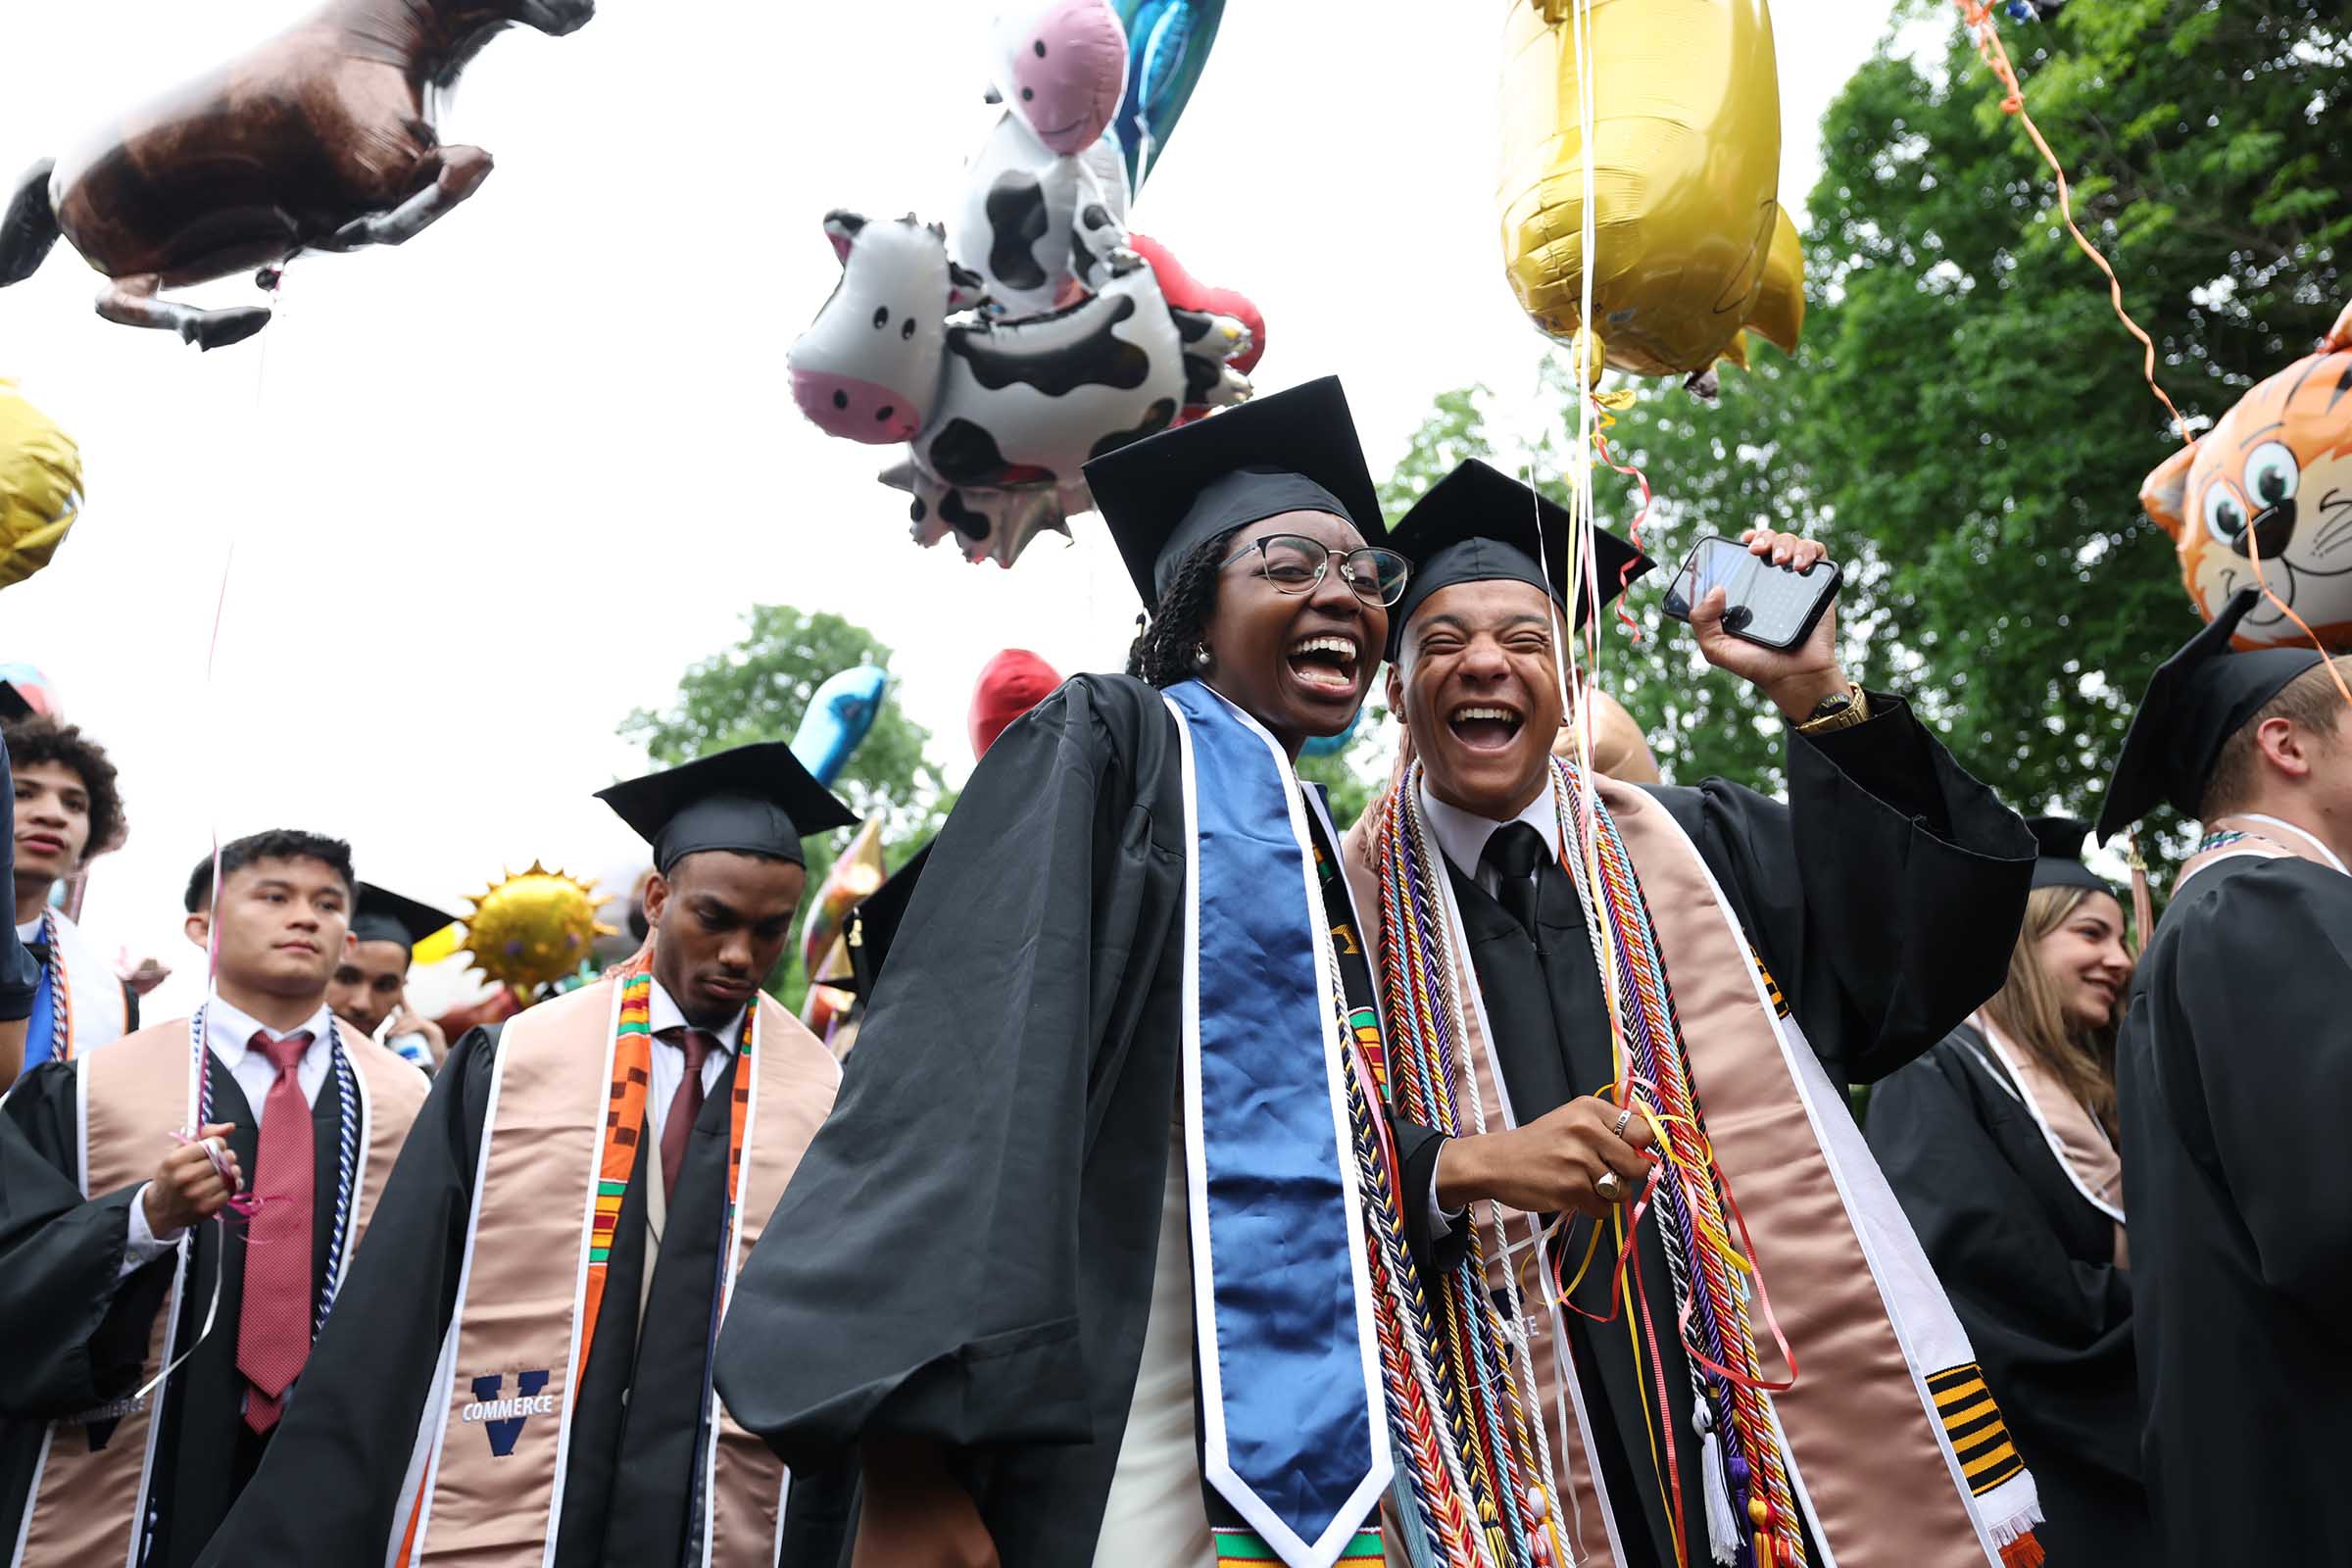 Two grads smile enthusiastically while holding their balloons along with several other grads in a crowd